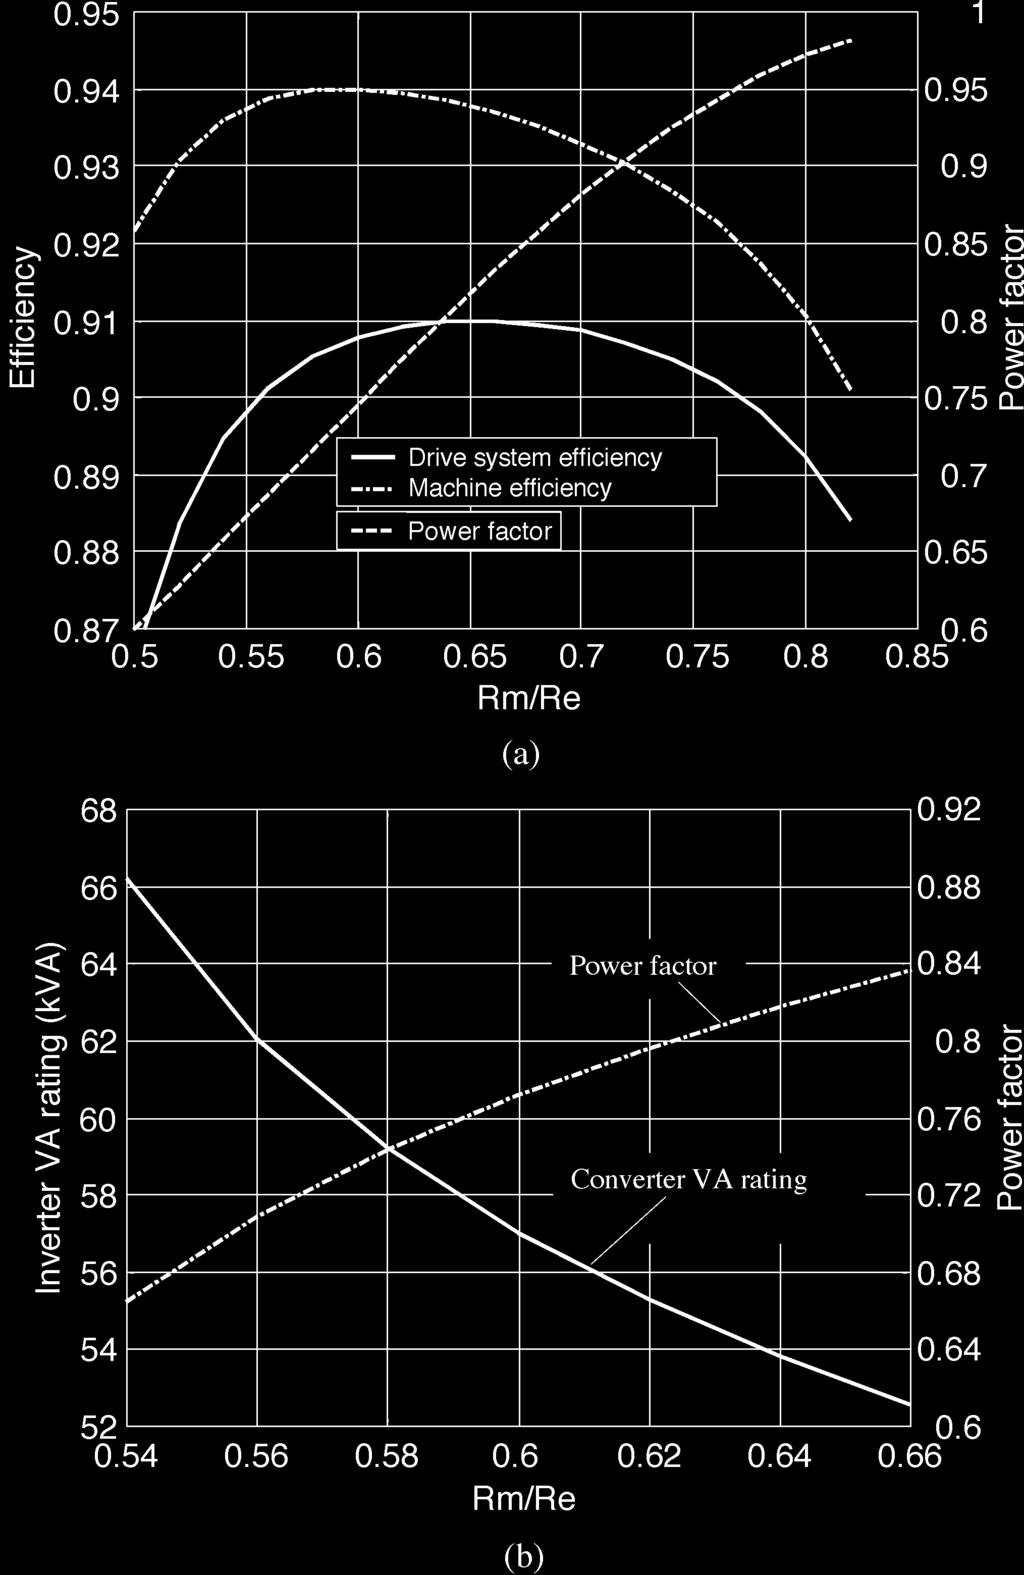 3276 IEEE TRANSACTIONS ON MAGNETICS, VOL. 40, NO. 5, SEPTEMBER 2004 Fig. 19. Variation of machine and drive efficiency, converter VA rating and power factor with R =R. (a) Efficiency and power factor.